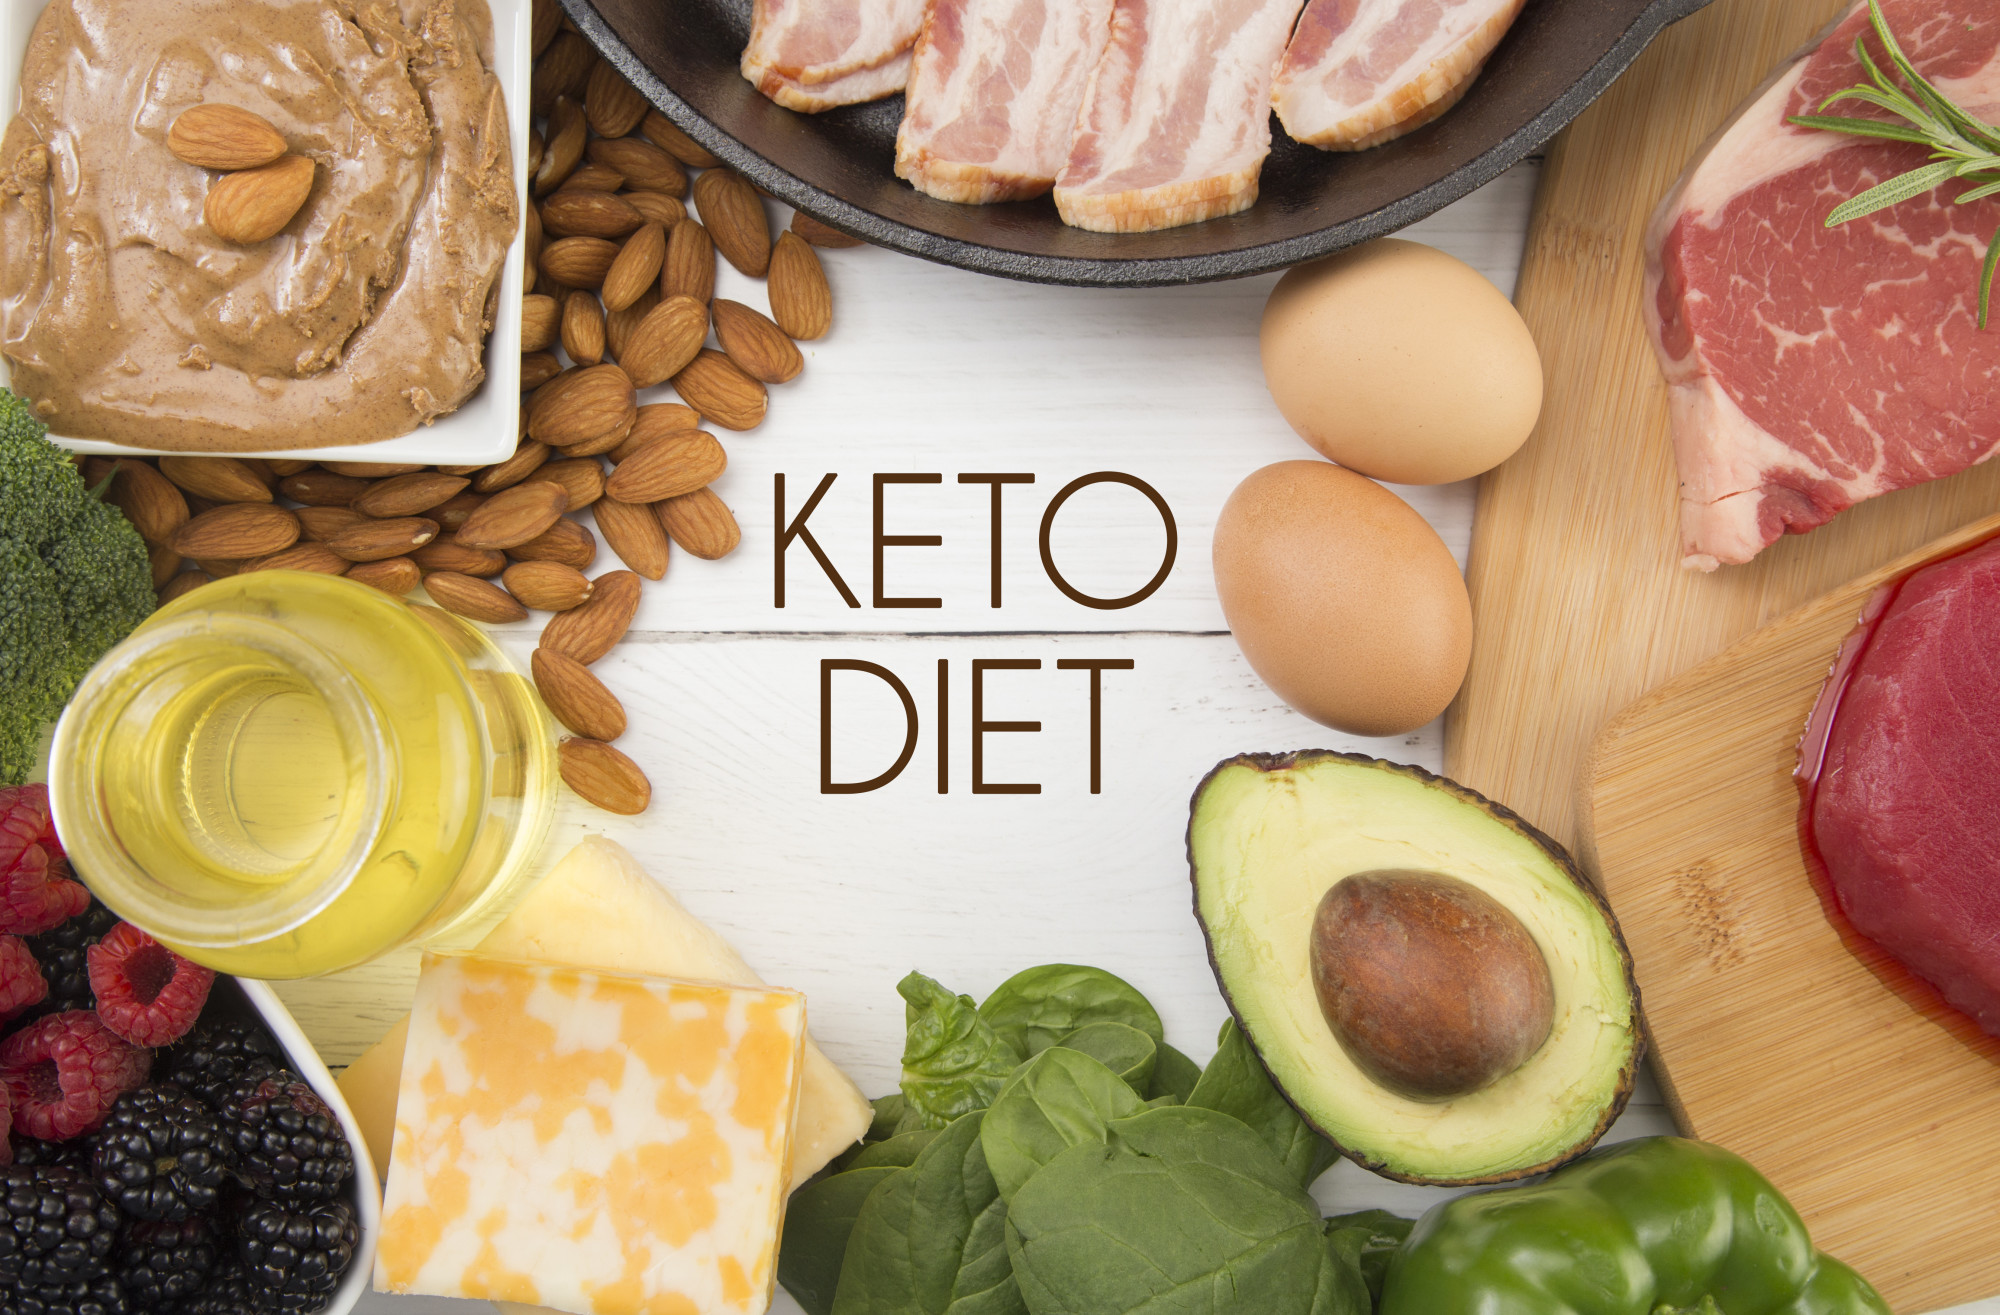 How Do I Start the Keto Diet and What Benefits Will I Get?